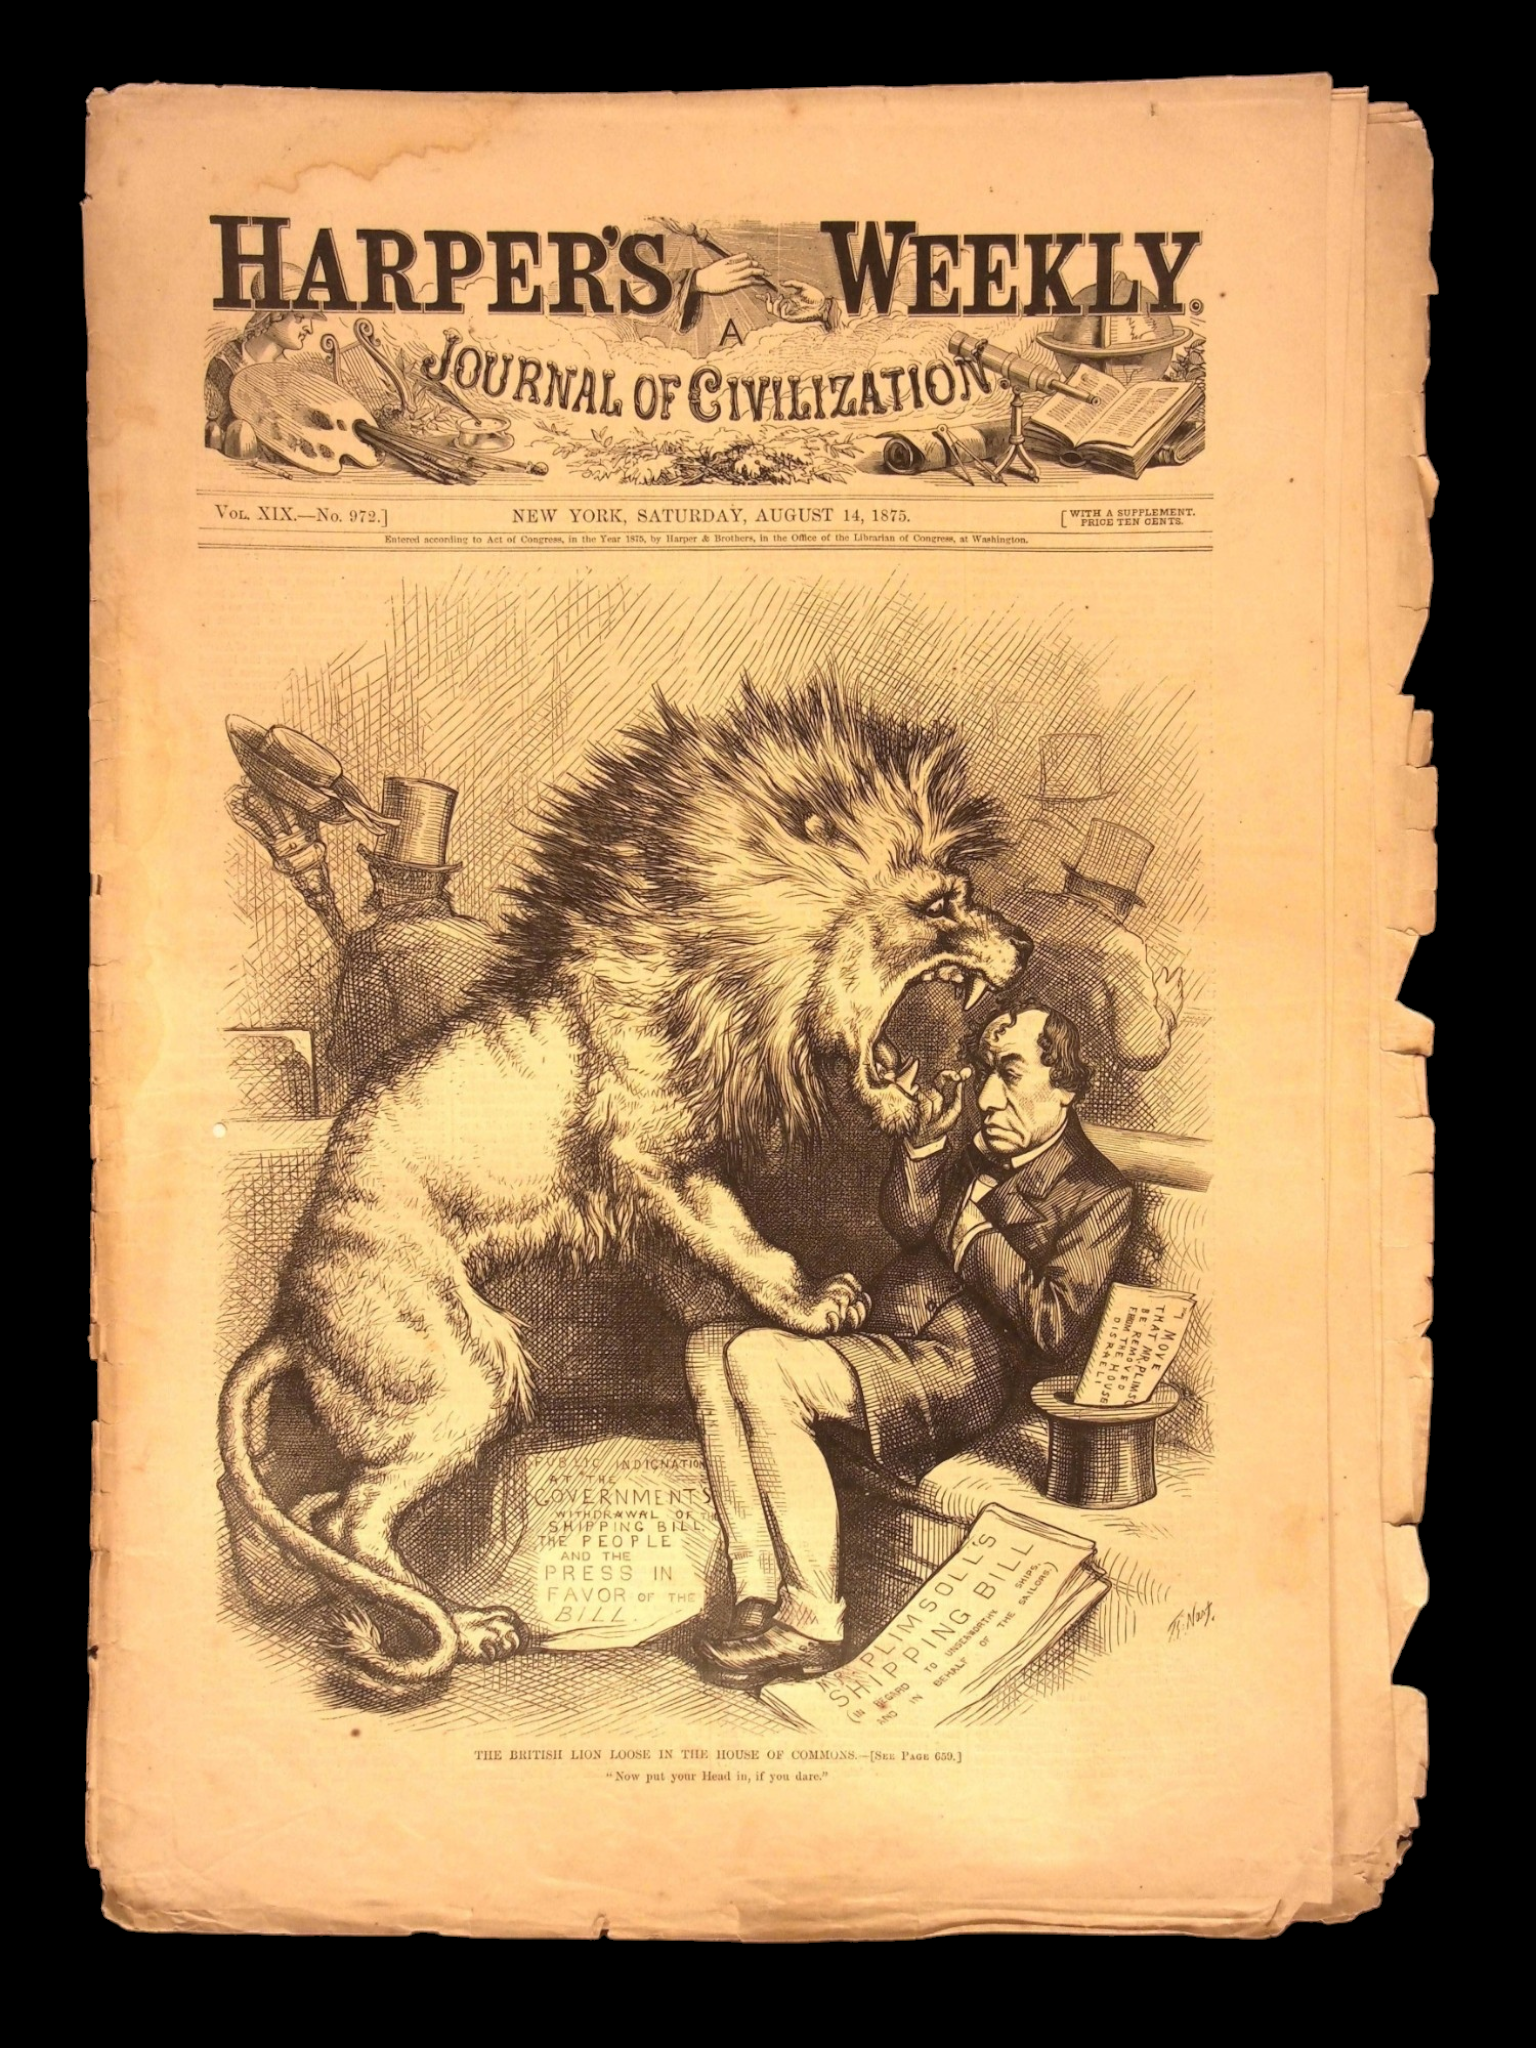 Harper's Weekly: West & Countryside Scenes, Emperor Julian the Apostate of Rome — Aug. 14, 1875